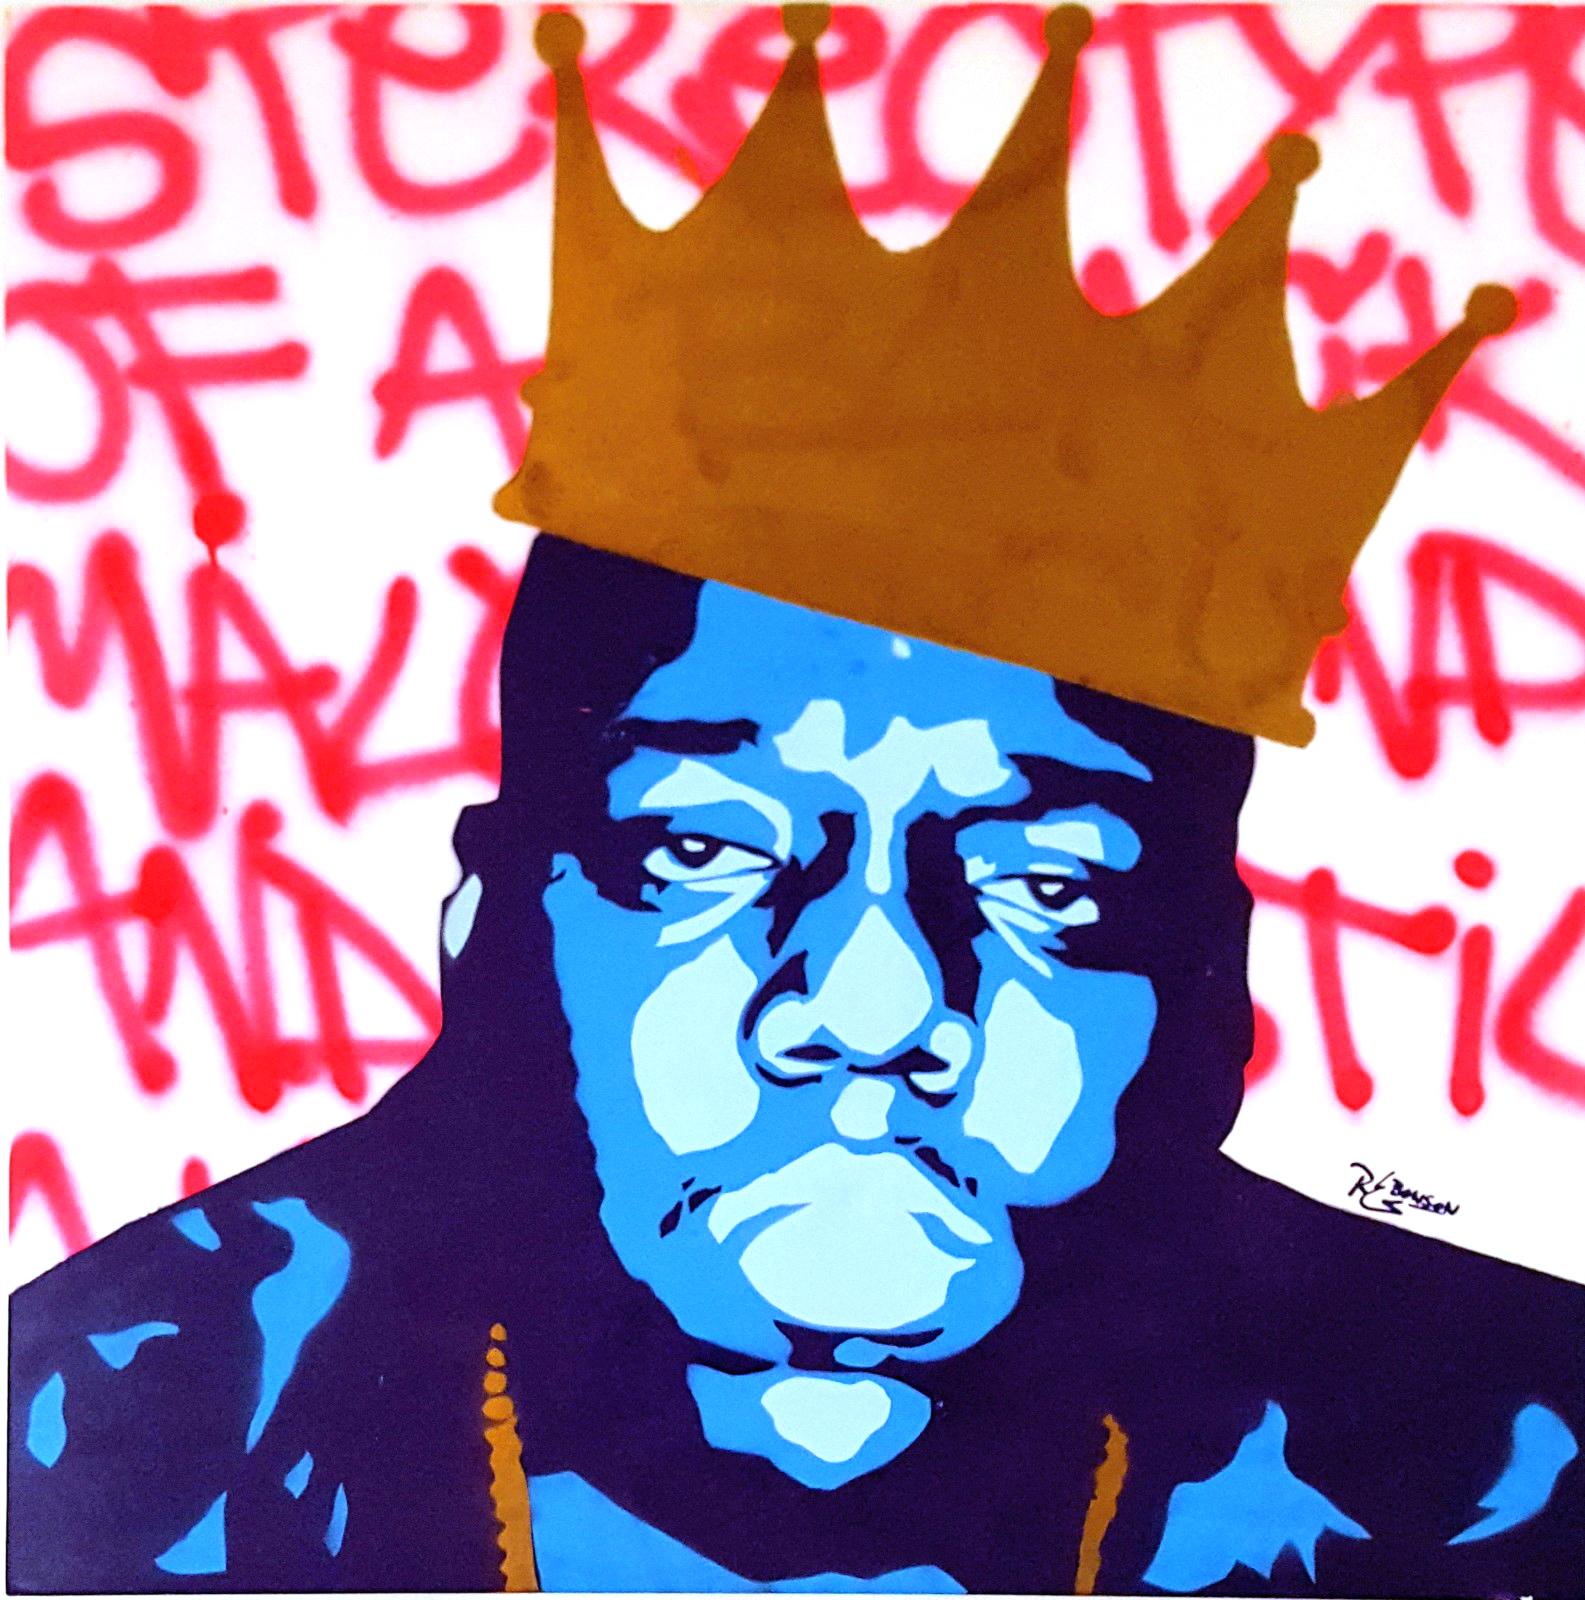 This original figurative work of Biggie Smalls by Rod Benson is a unique, acrylic and spray paint on canvas painting that is signed by the artist on the front. The original pop portrait is a 36" square. It comes with a numbered and signed